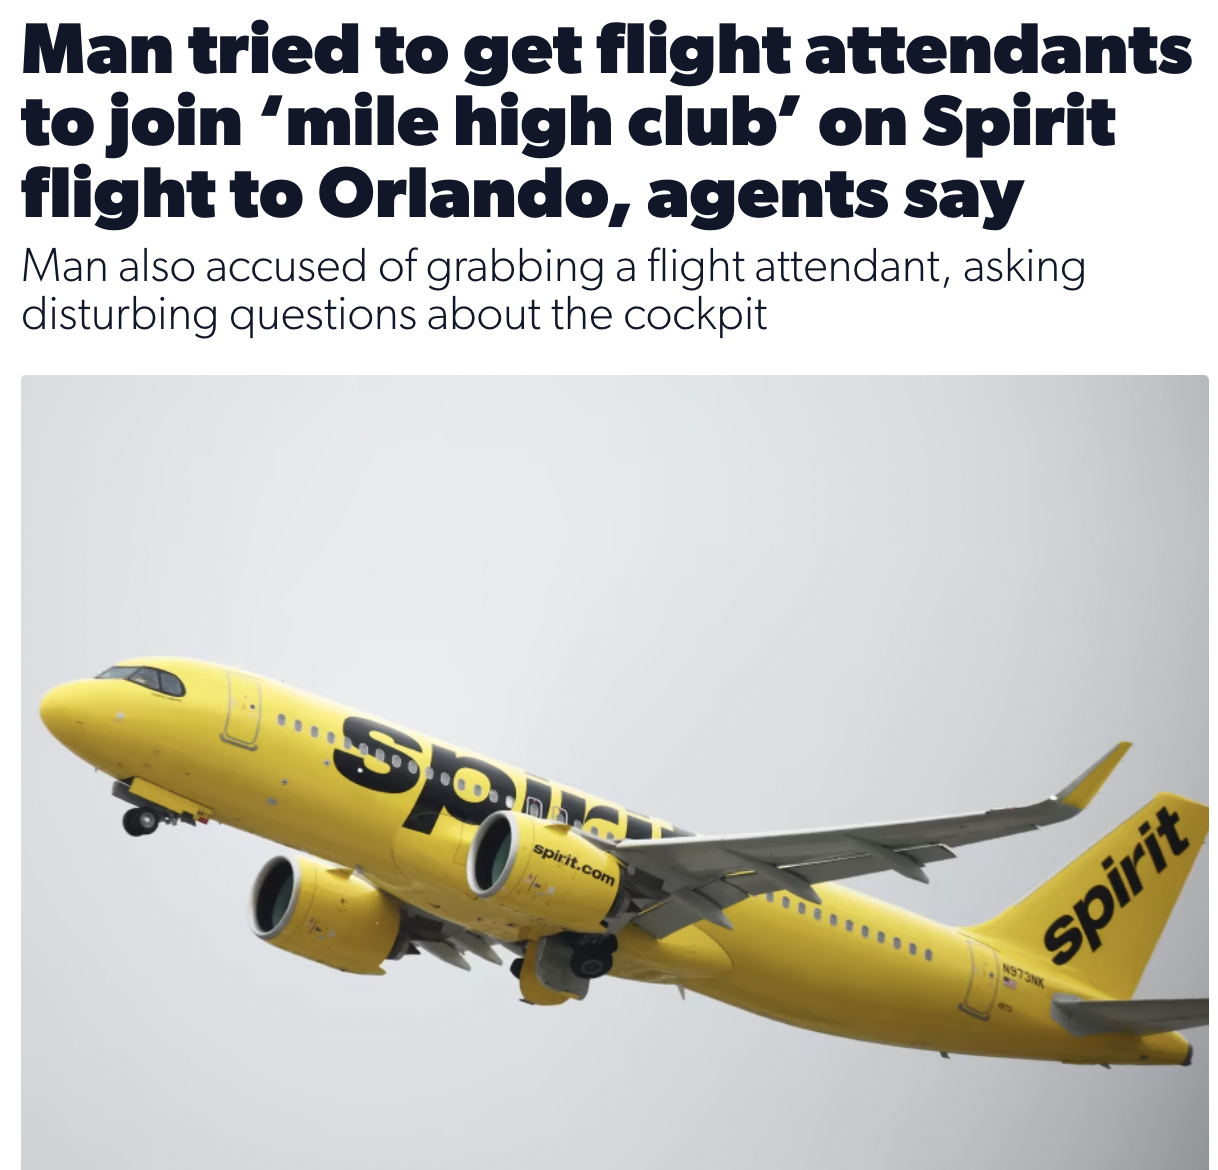 spirit airlines wrong flight child - Man tried to get flight attendants to join 'mile high club' on Spirit flight to Orlando, agents say Man also accused of grabbing a flight attendant, asking disturbing questions about the cockpit sp spirit.com spirit